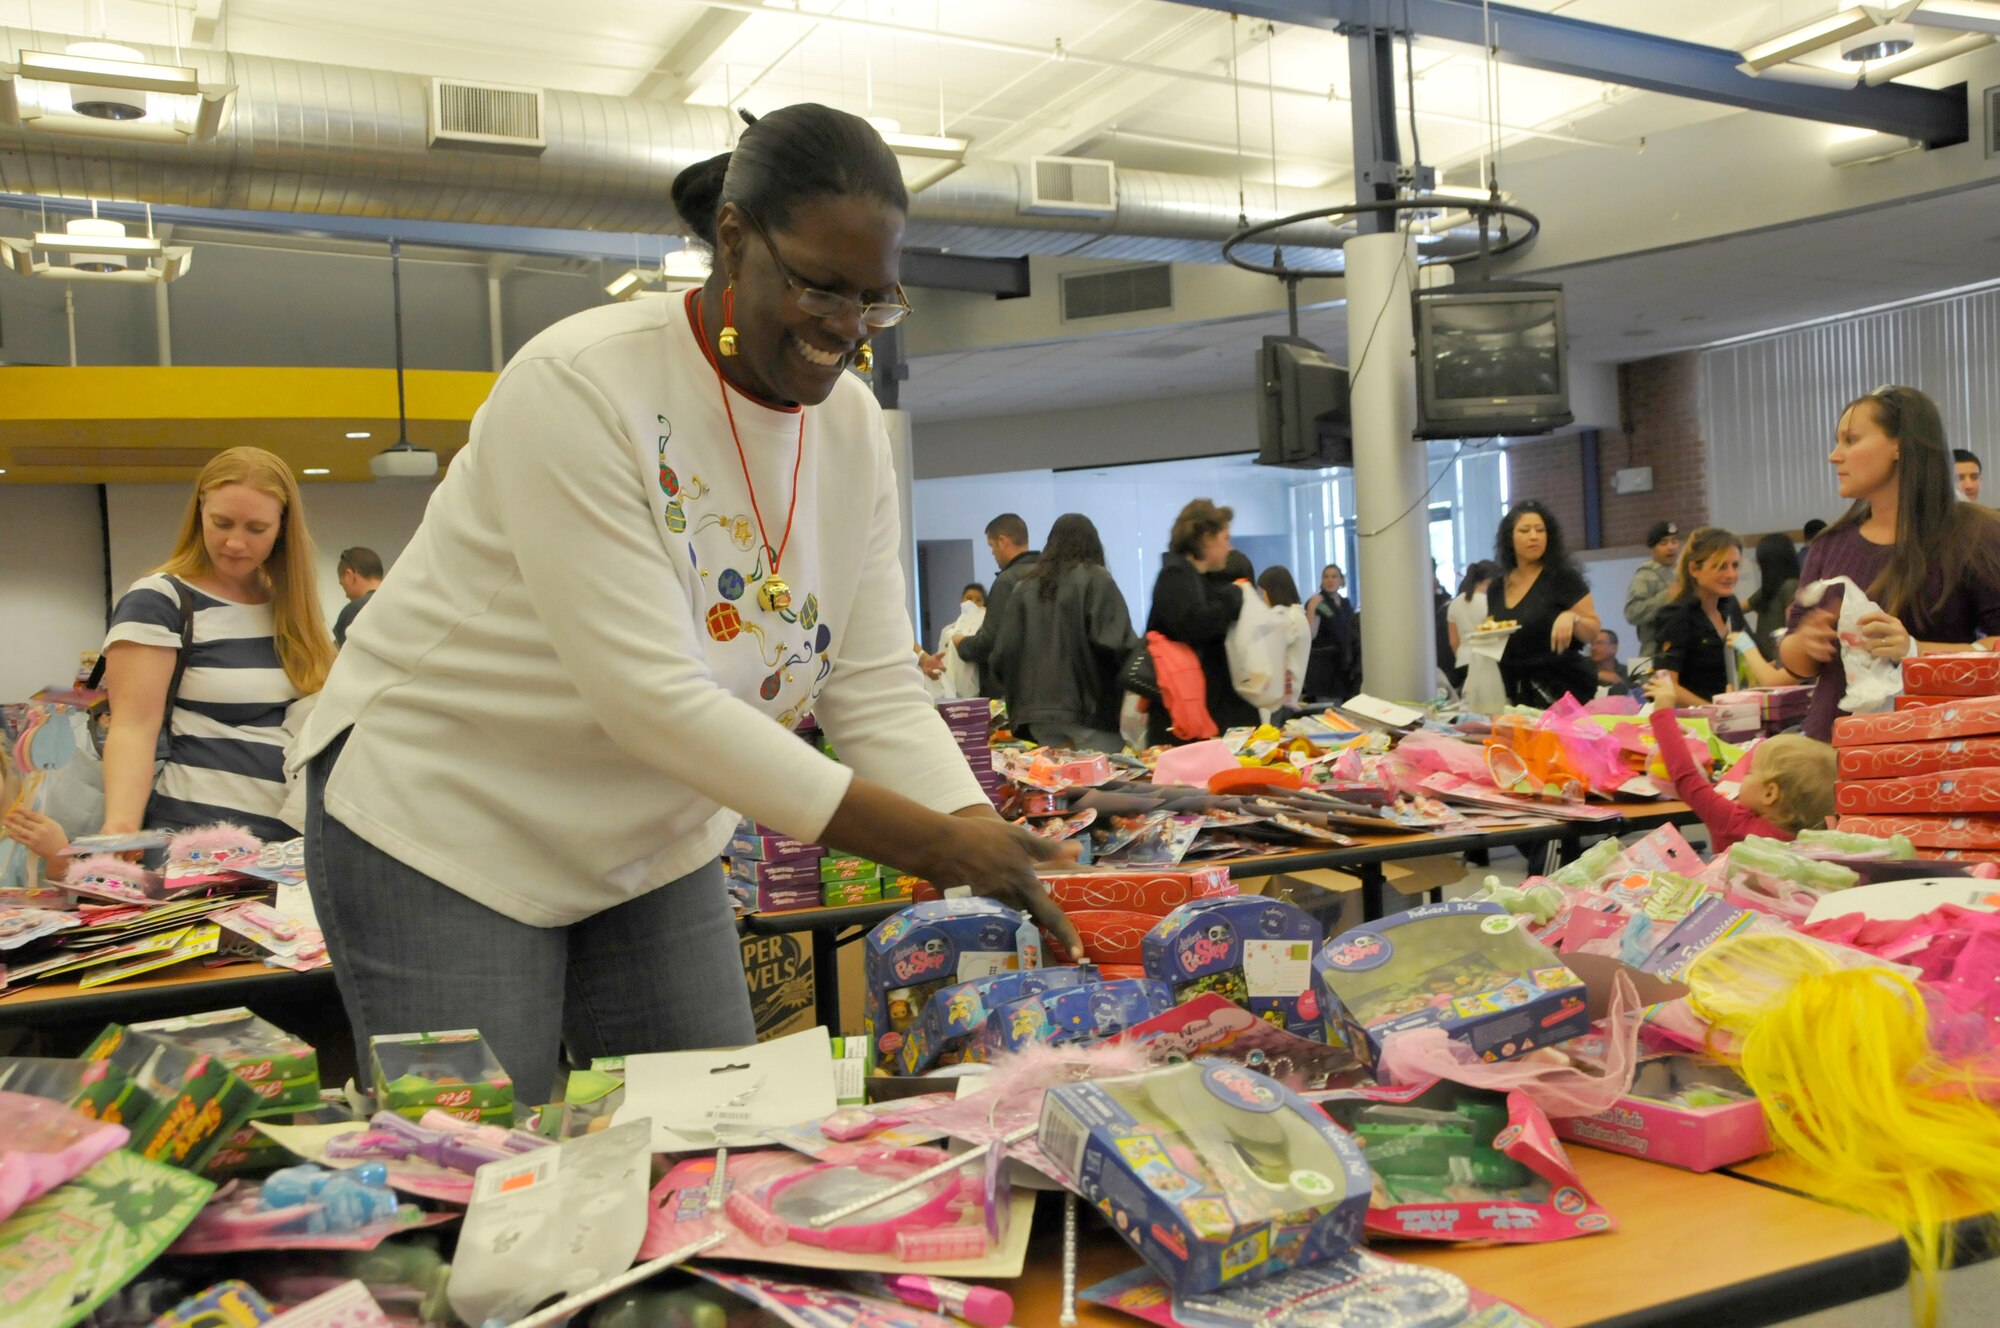 Tech Sgt. Alicia Archie, 162nd Fighter Wing Family Readiness Group volunteer, arranges toys at the Holiday Open House, Dec. 10, in the 162nd Fighter Wing dining facility. (U.S. Air Force photo/Master Sgt. Dave Neve)